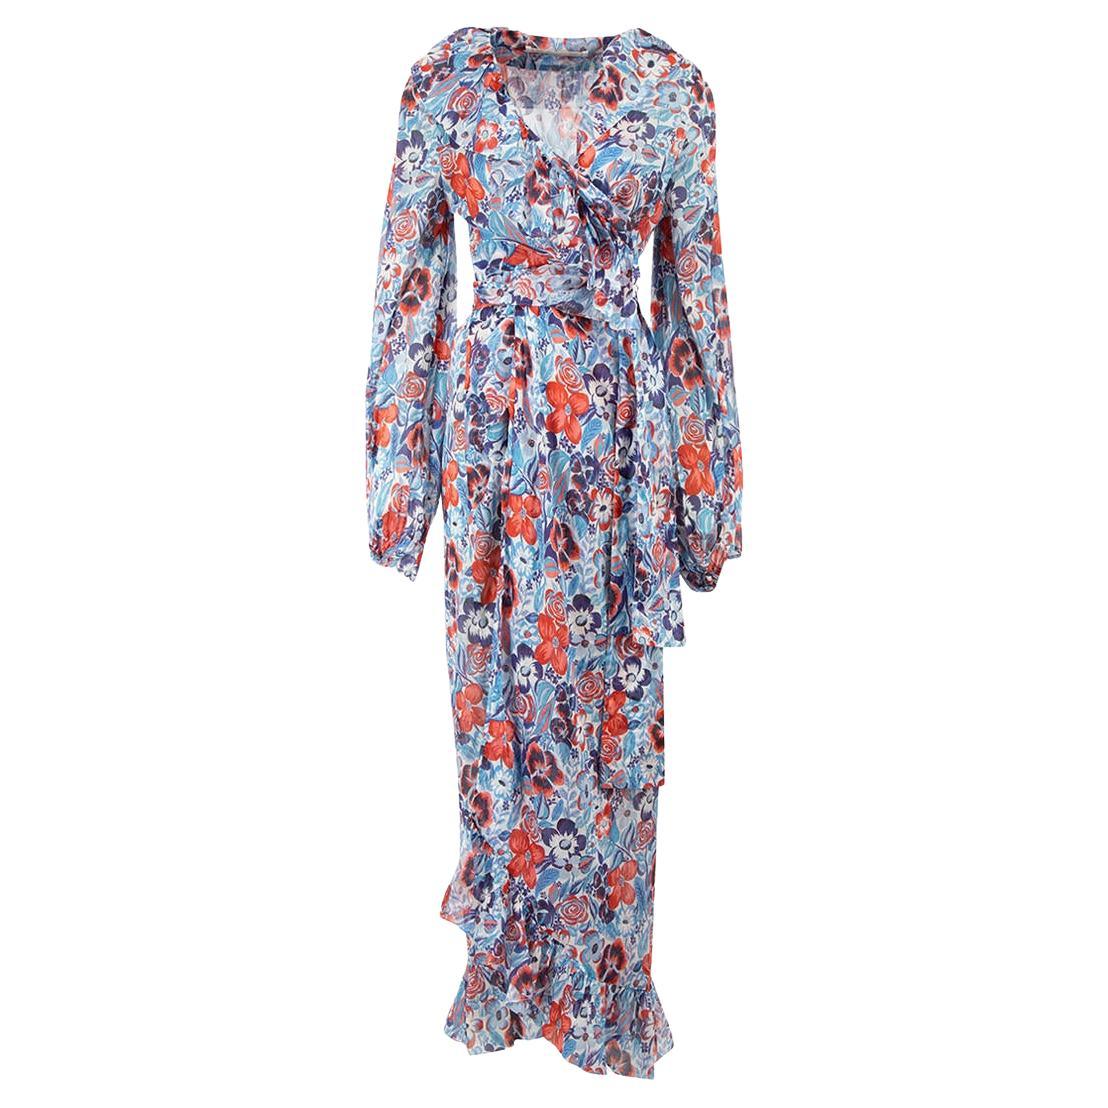 Pre-Loved The Vampire's Wife Women's Floral Pattern Wrap Maxi Dress For Sale